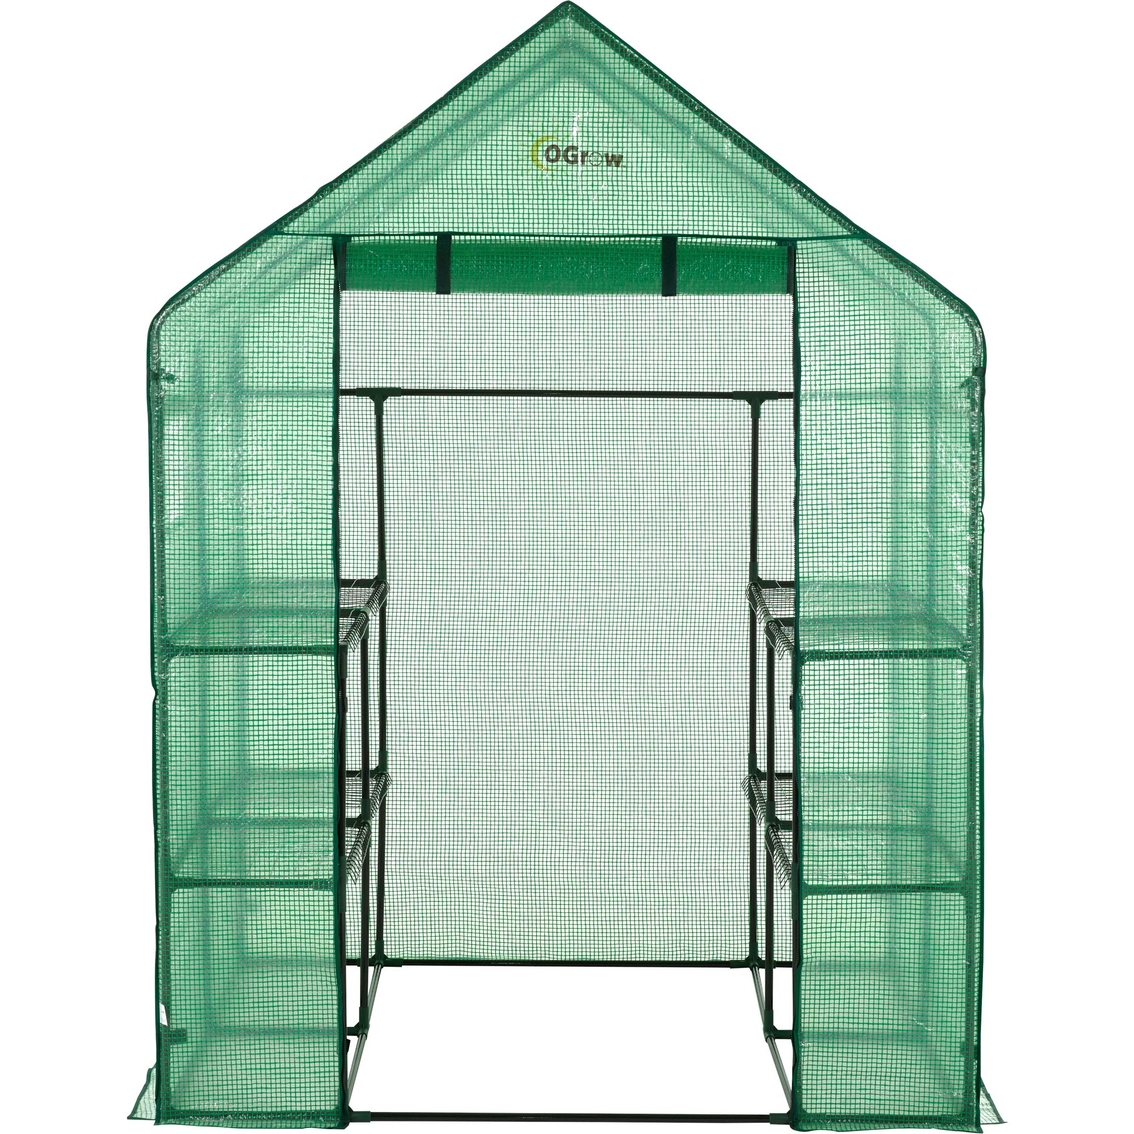 Ogrow Deluxe Walk In 2 Tier 8 Shelf Portable Lawn and Garden Greenhouse - Image 2 of 7